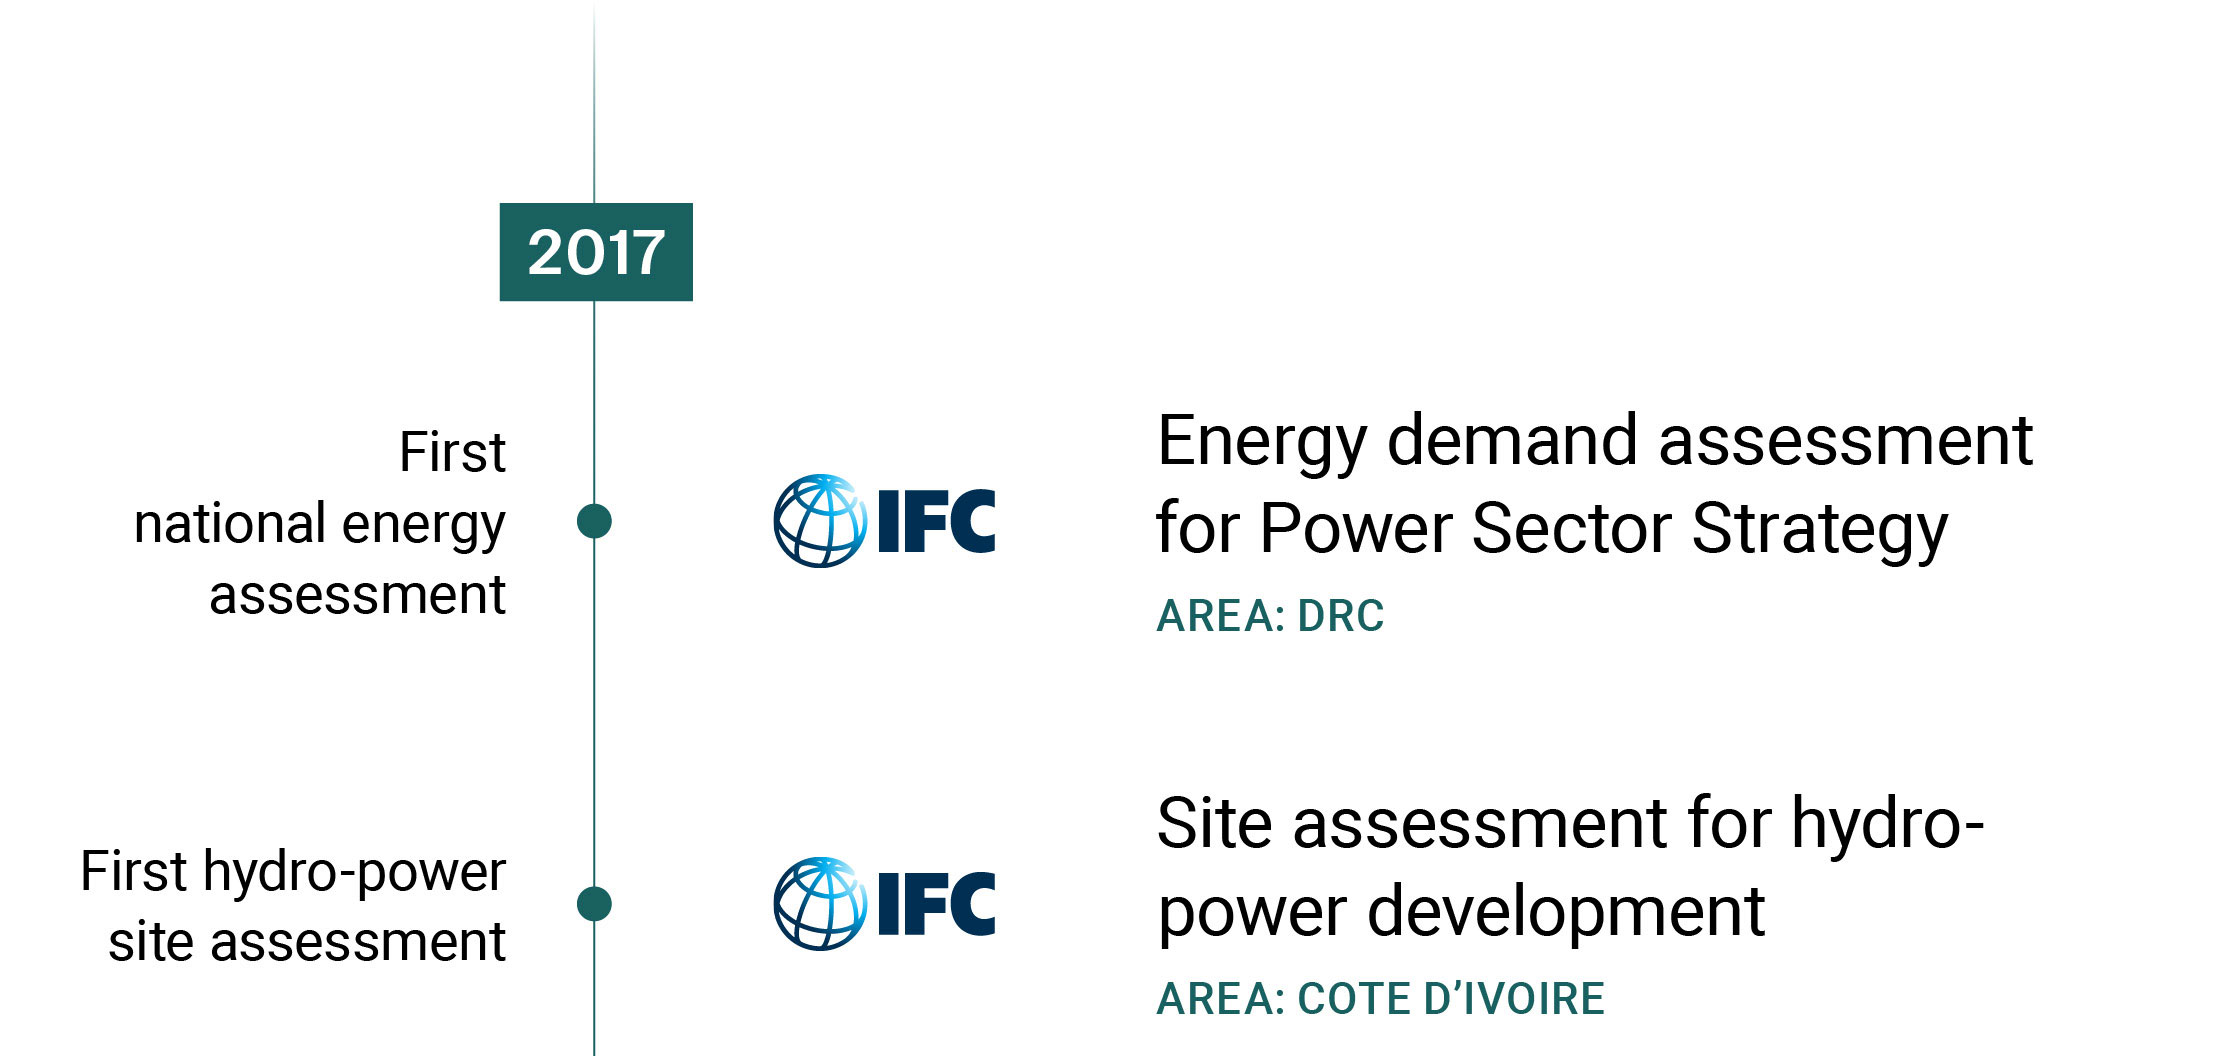 2017 Energy demand assessment for Power Sector Strategy IFC DRC First national energy assessment 2017 Site assessment for hydro power development IFC Cote d’Ivoire First hydropower site assessment